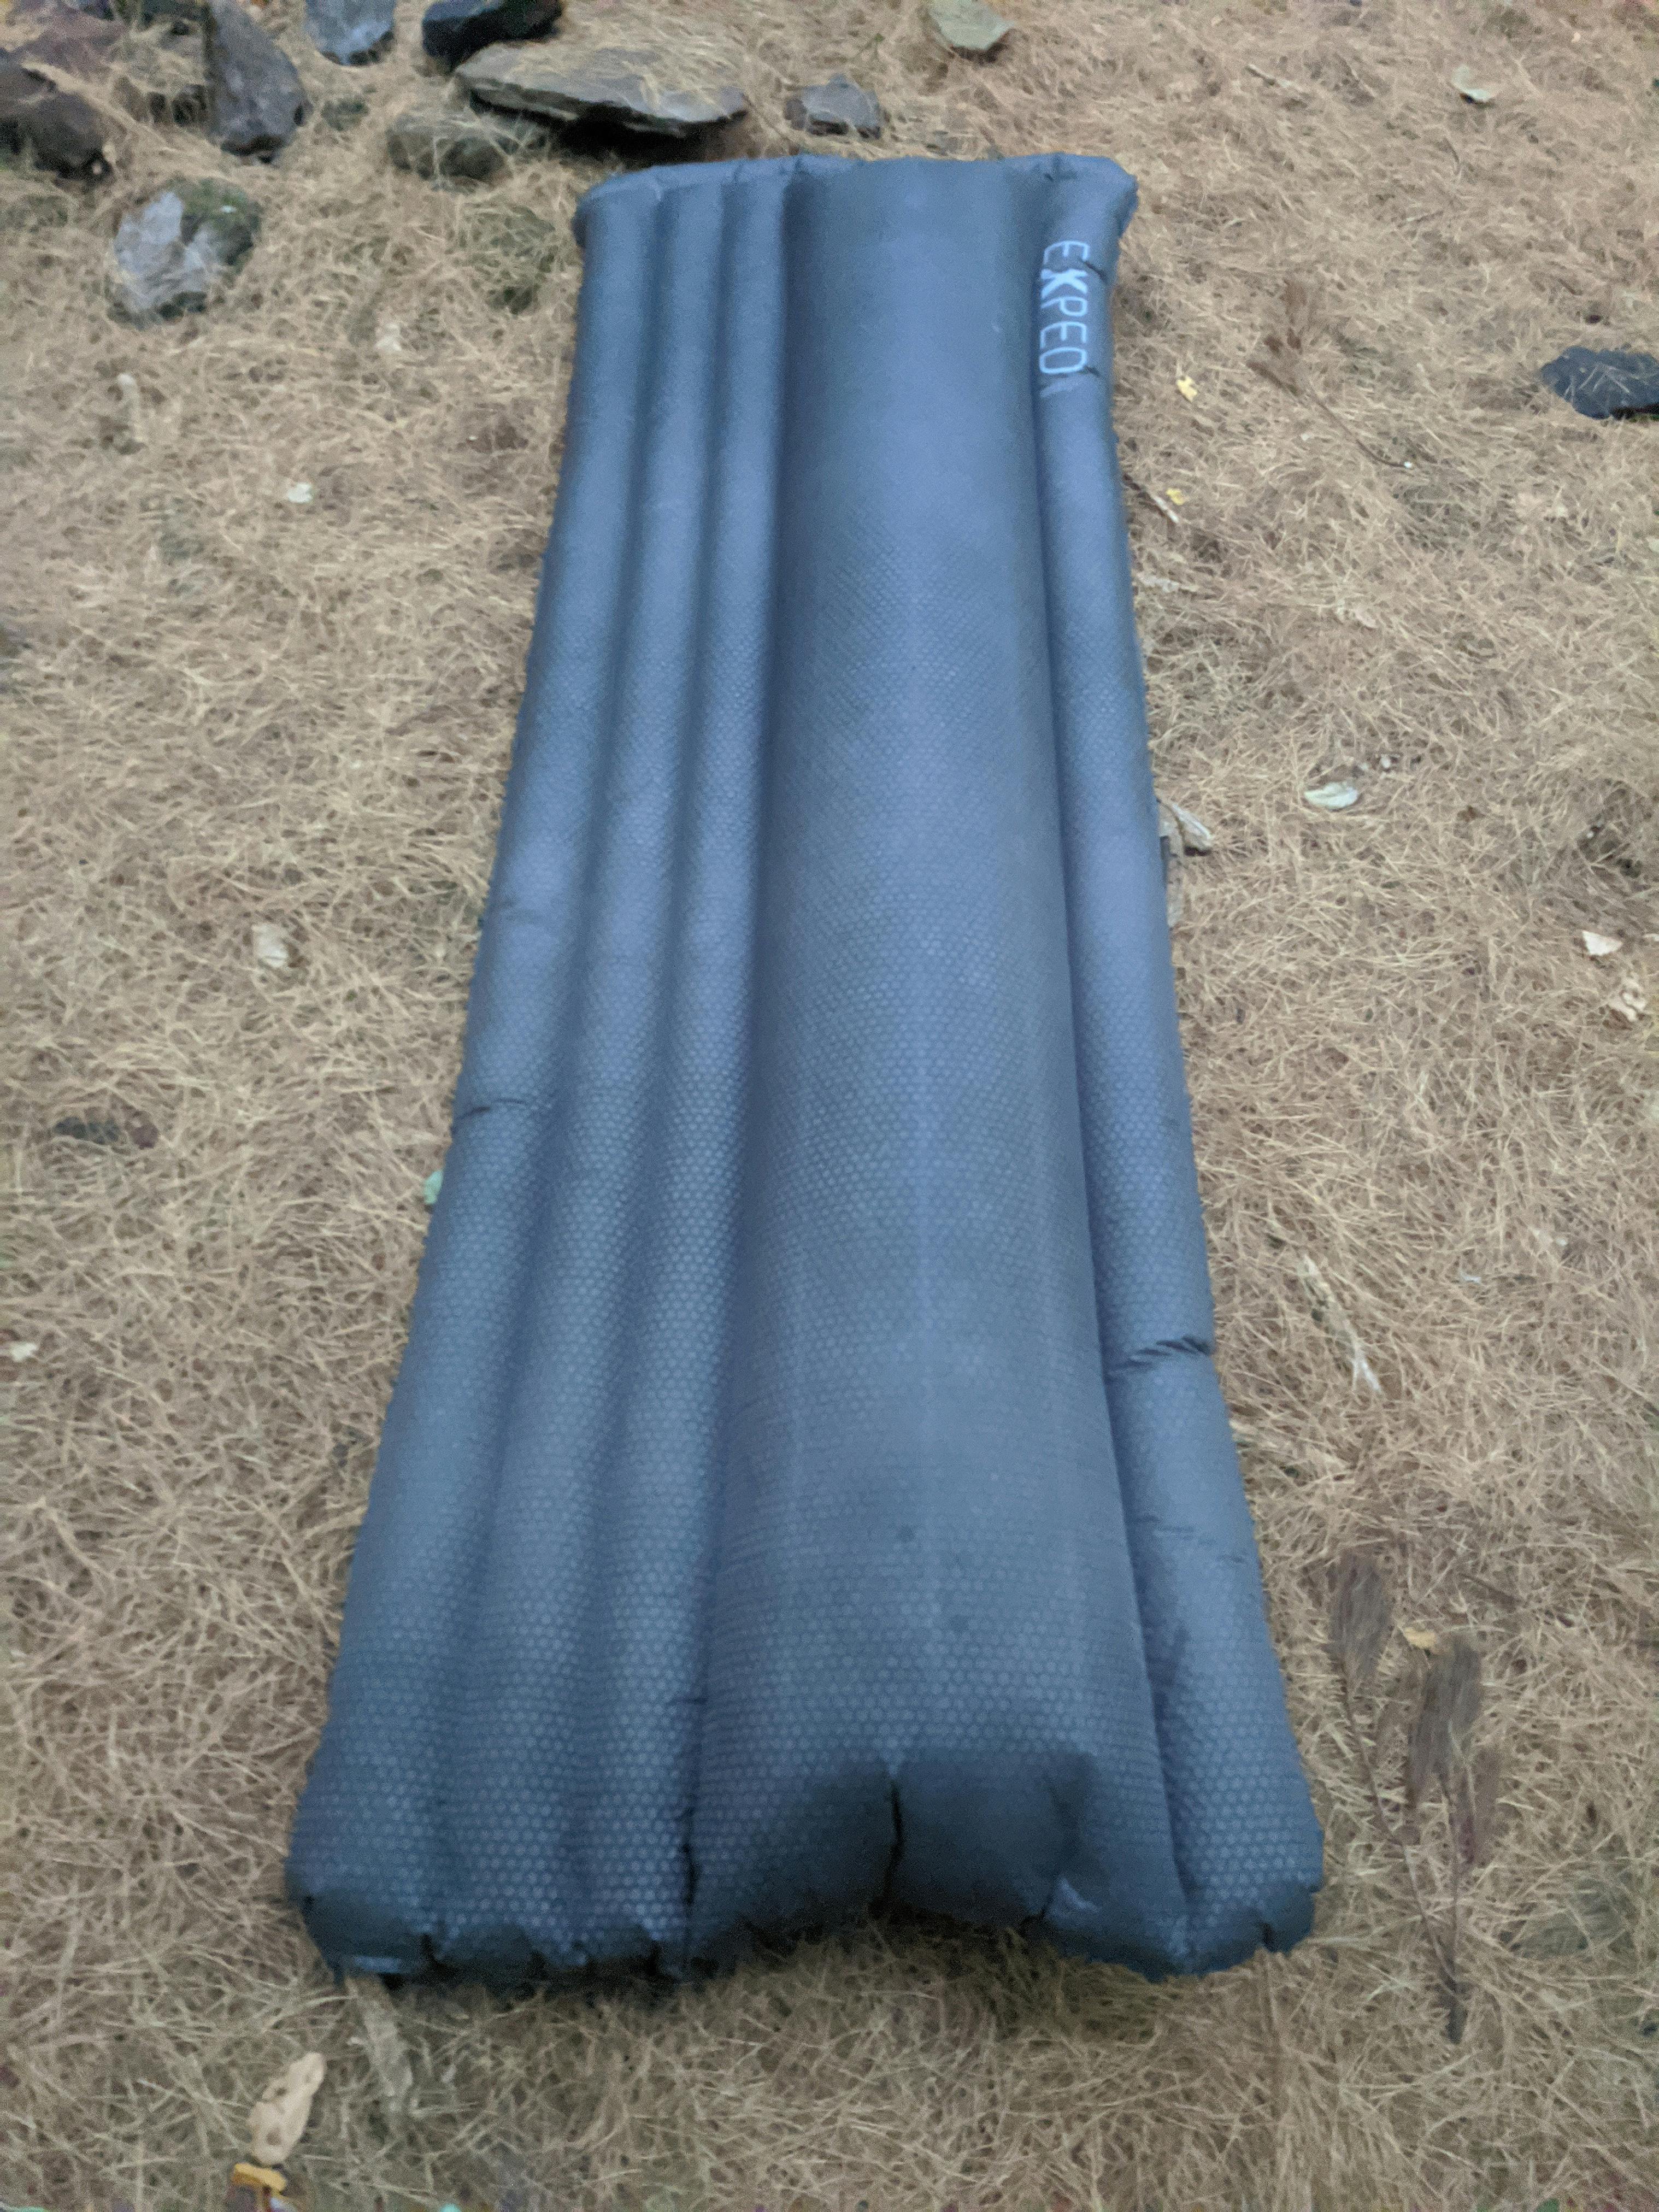 The Exped DownMat HL Winter Sleeping Pad.